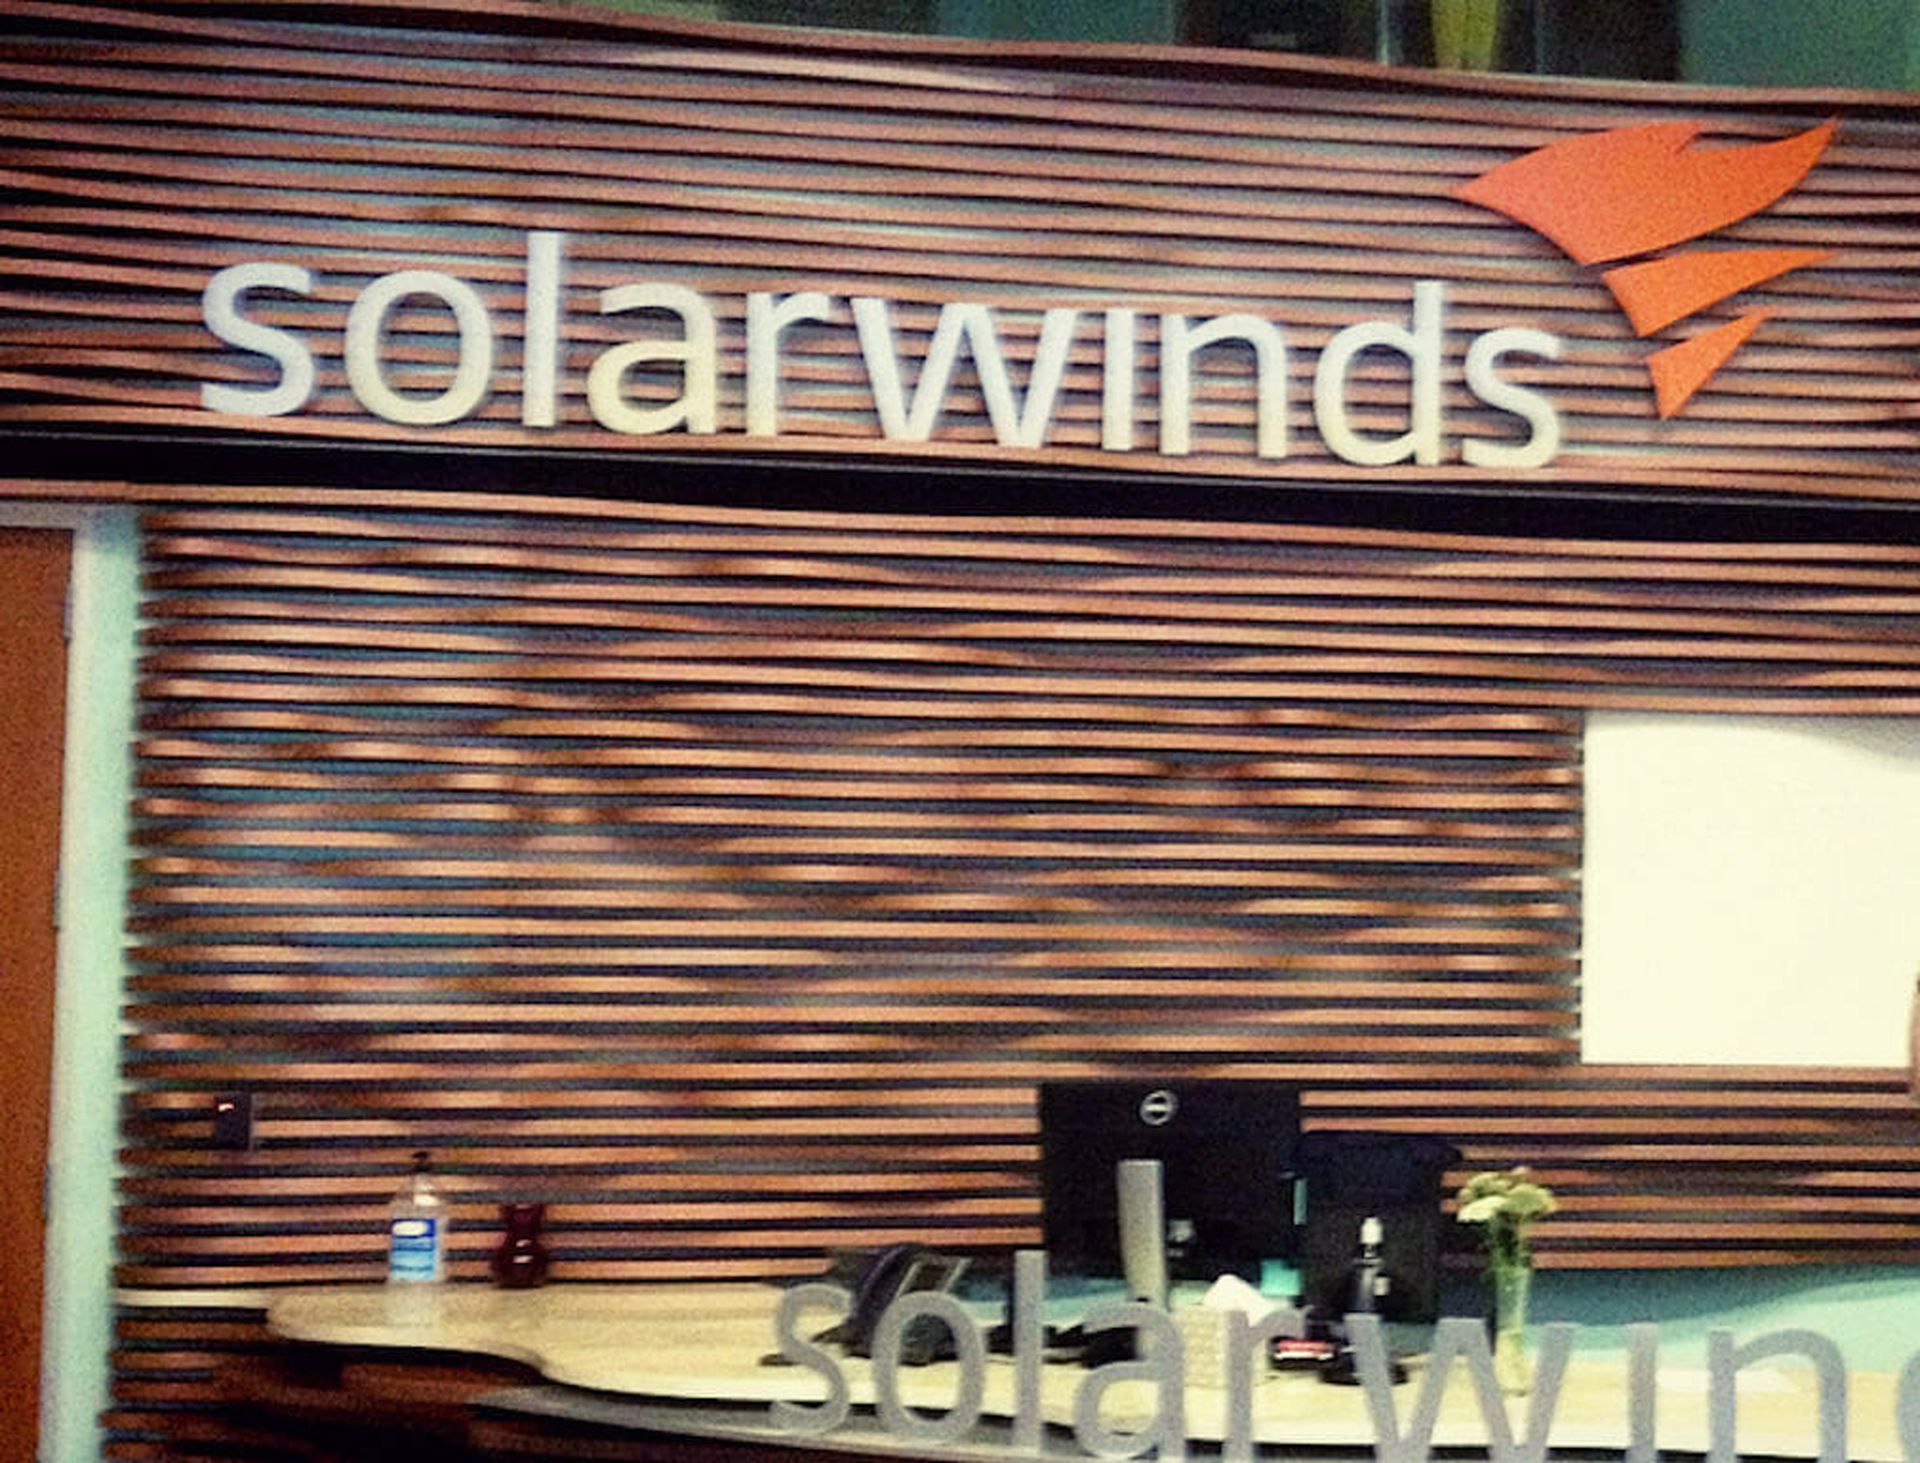 Today’s columnists, Pascal Geenens and Daniel Smith of Radware, say that while the SolarWinds case brought supply-chain attacks into the limelight, they are not new and security teams must finally manage them more effectively.